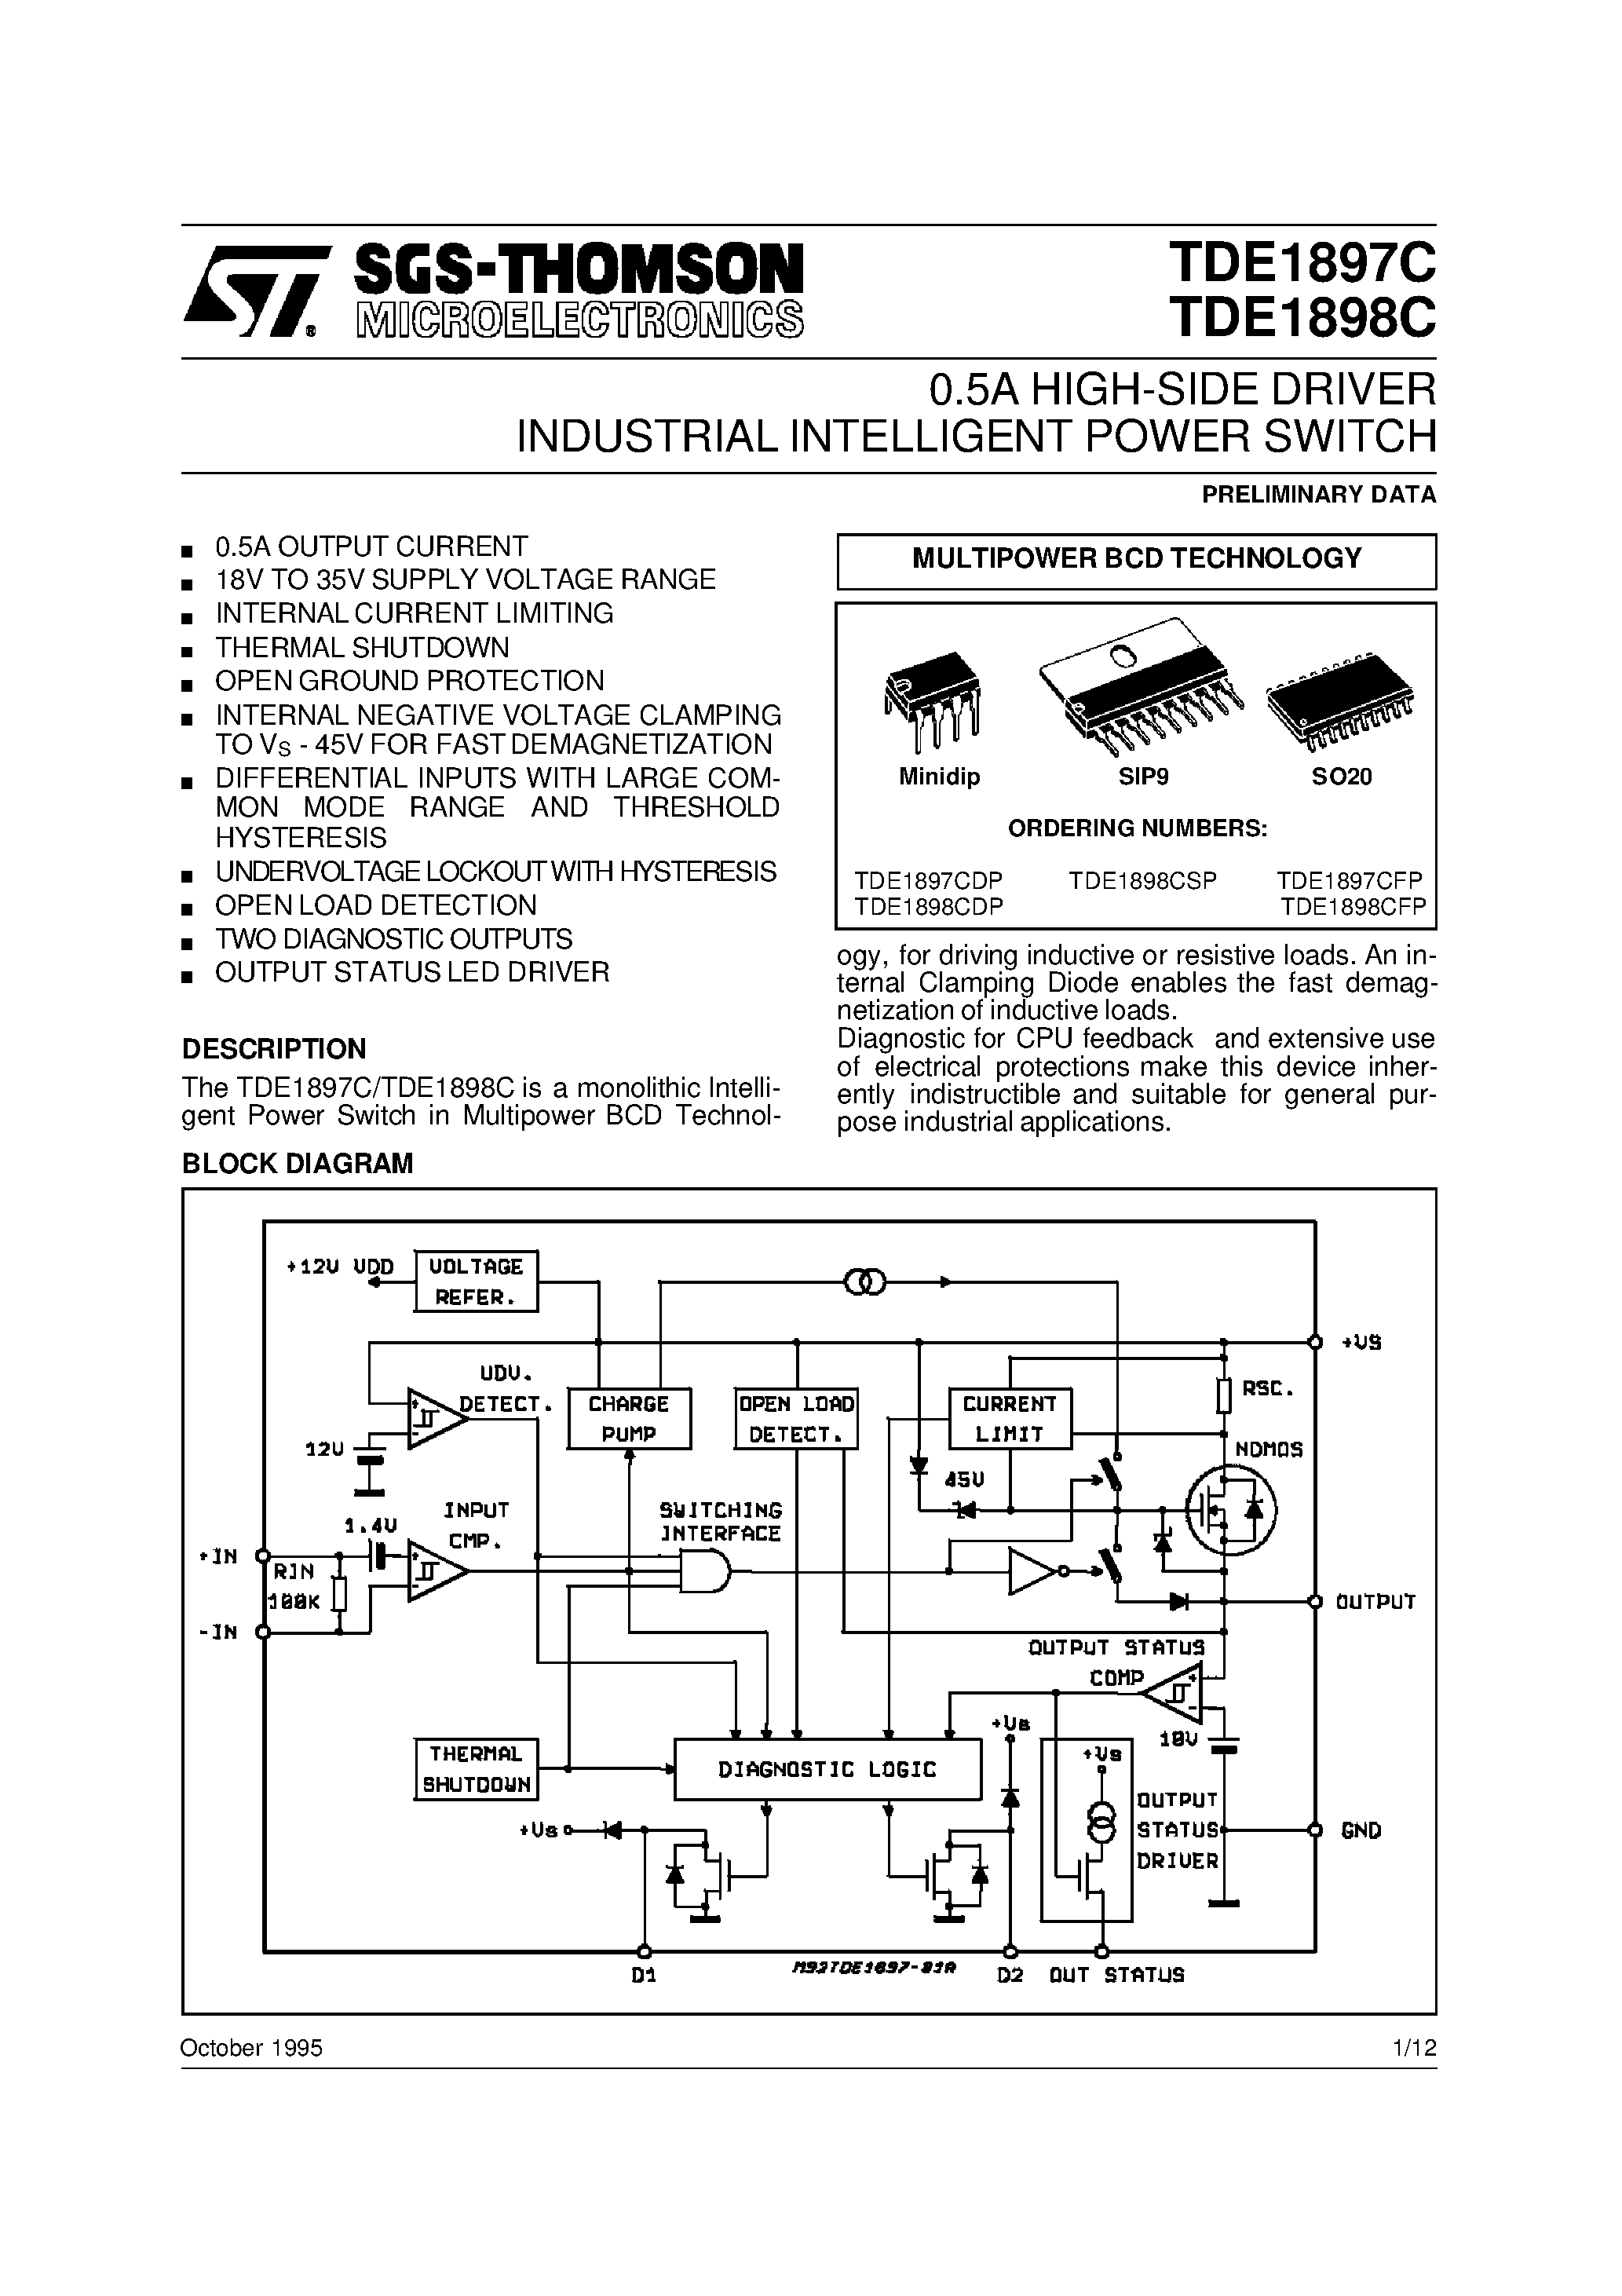 Даташит TDE1898CSP - 0.5A HIGH-SIDE DRIVER INDUSTRIAL INTELLIGENT POWER SWITCH страница 1